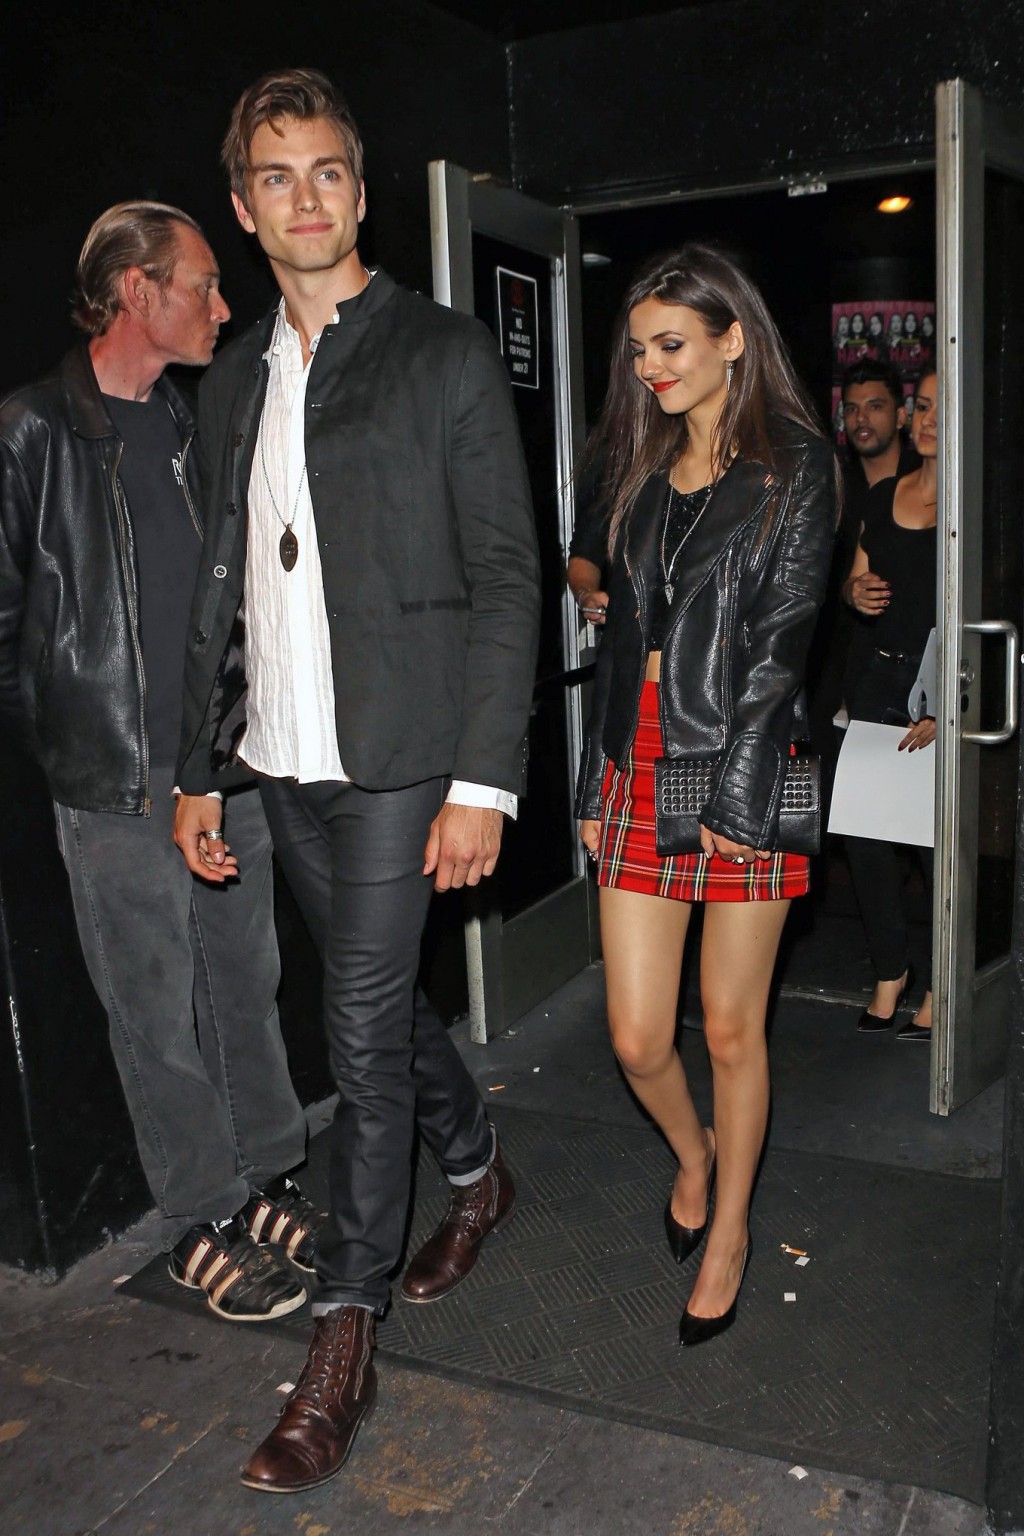 Victoria Justice leggy in plaid mini skirt leaving the Roxy Theatre in West Holl #75195057